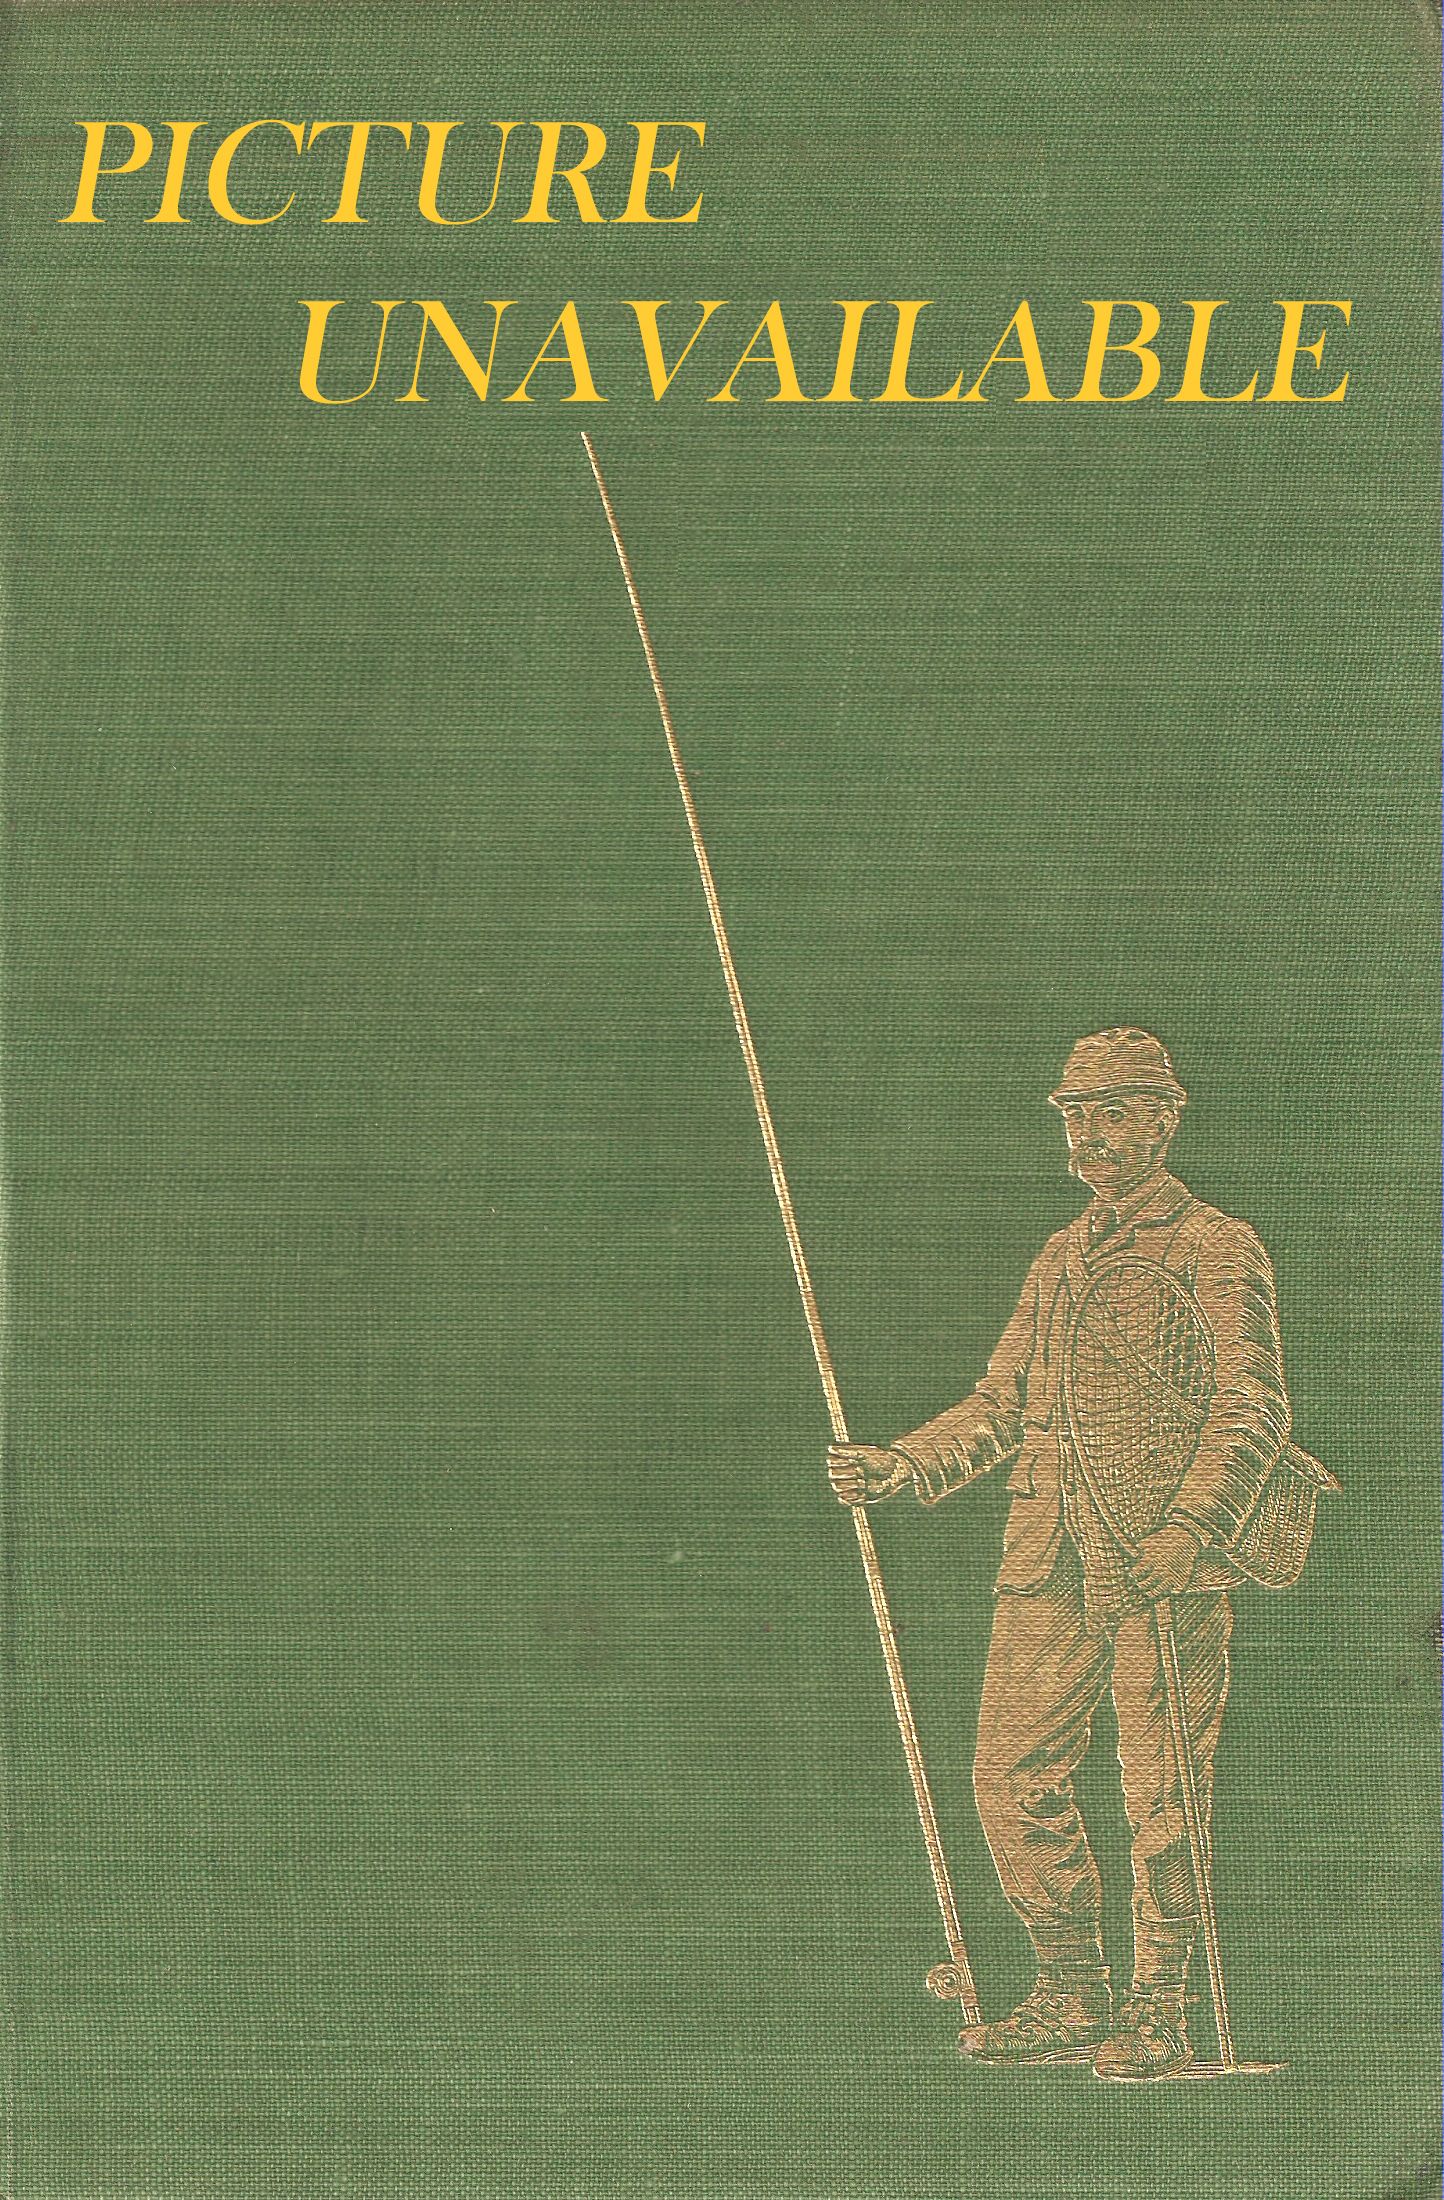 THE BOOK OF SHOOTING FOR SPORT AND SKILL.